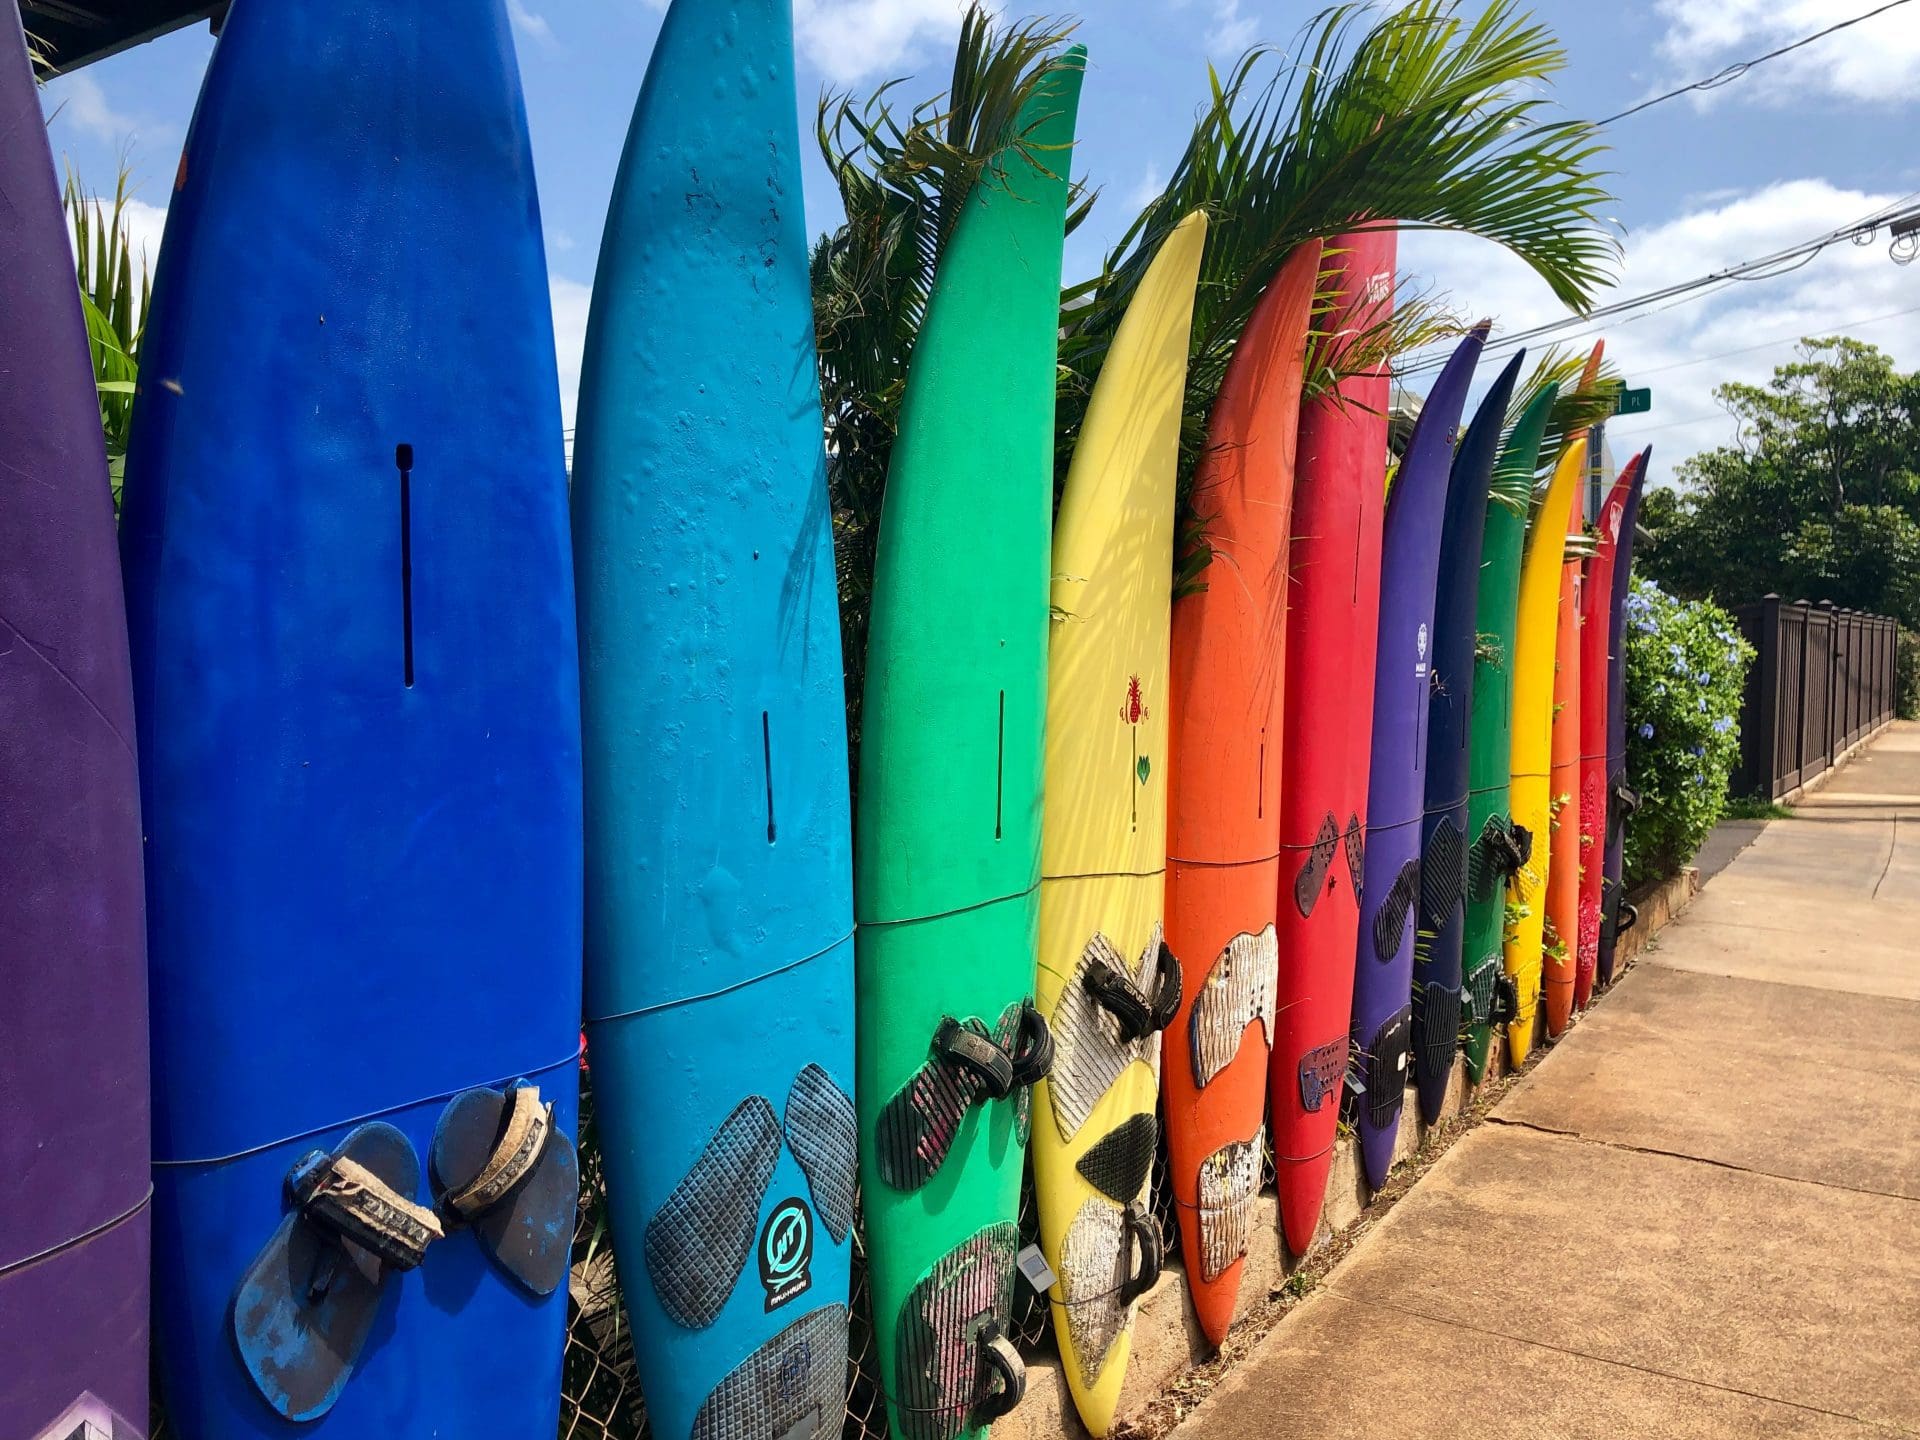 surfboards standing up vertically making a fence in every color of the rainbow